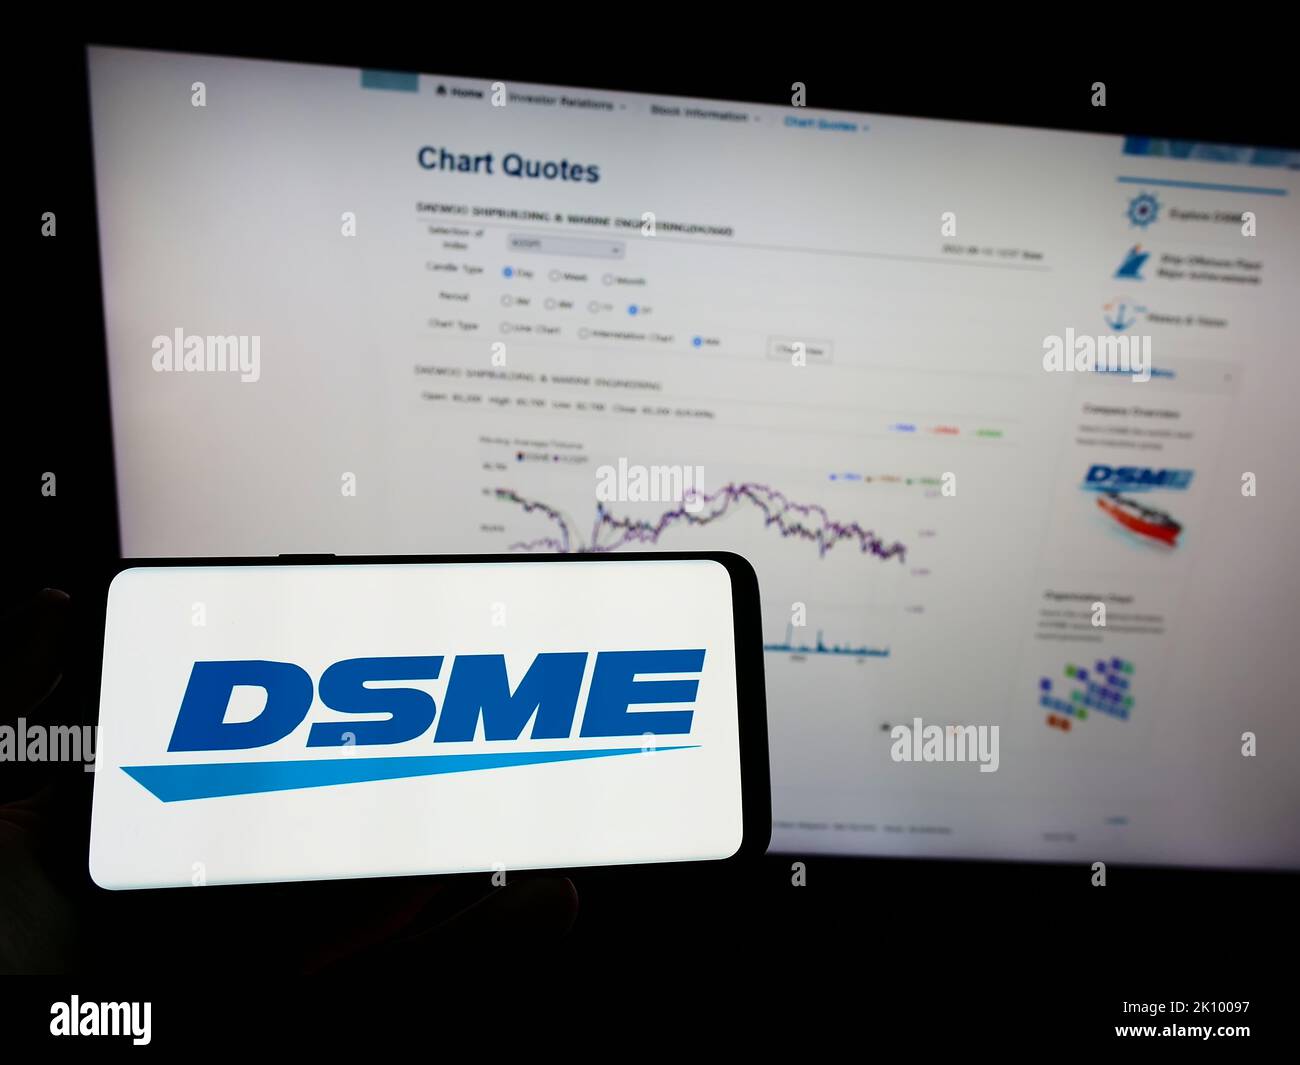 Person holding mobile phone with logo of Daewoo Shipbuilding and Marine Engineering (DSME) on screen in front of web page. Focus on phone display. Stock Photo